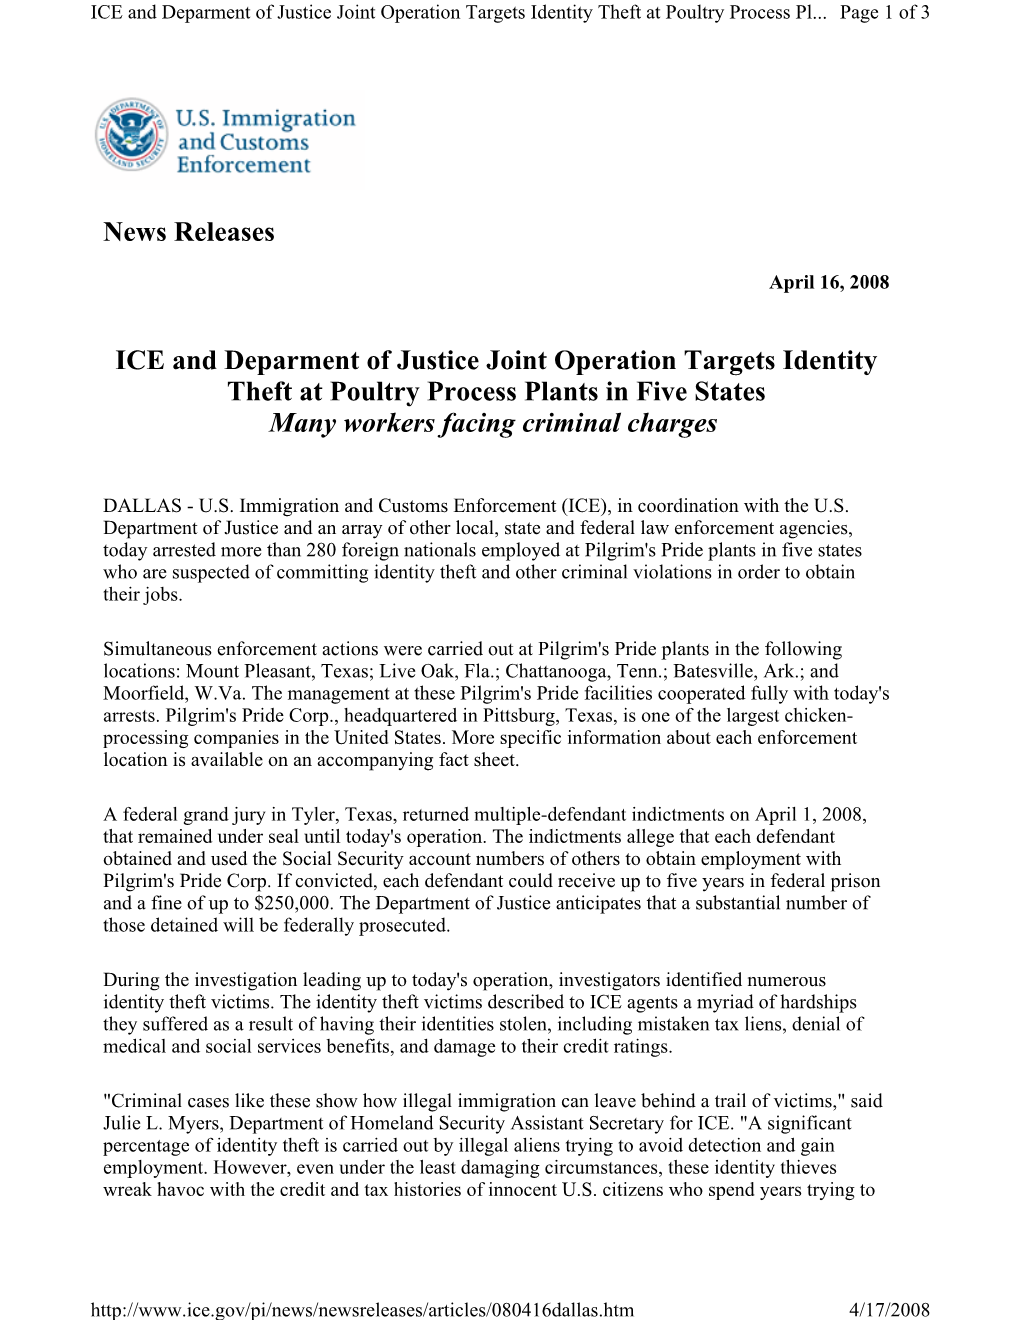 News Releases ICE and Deparment of Justice Joint Operation Targets